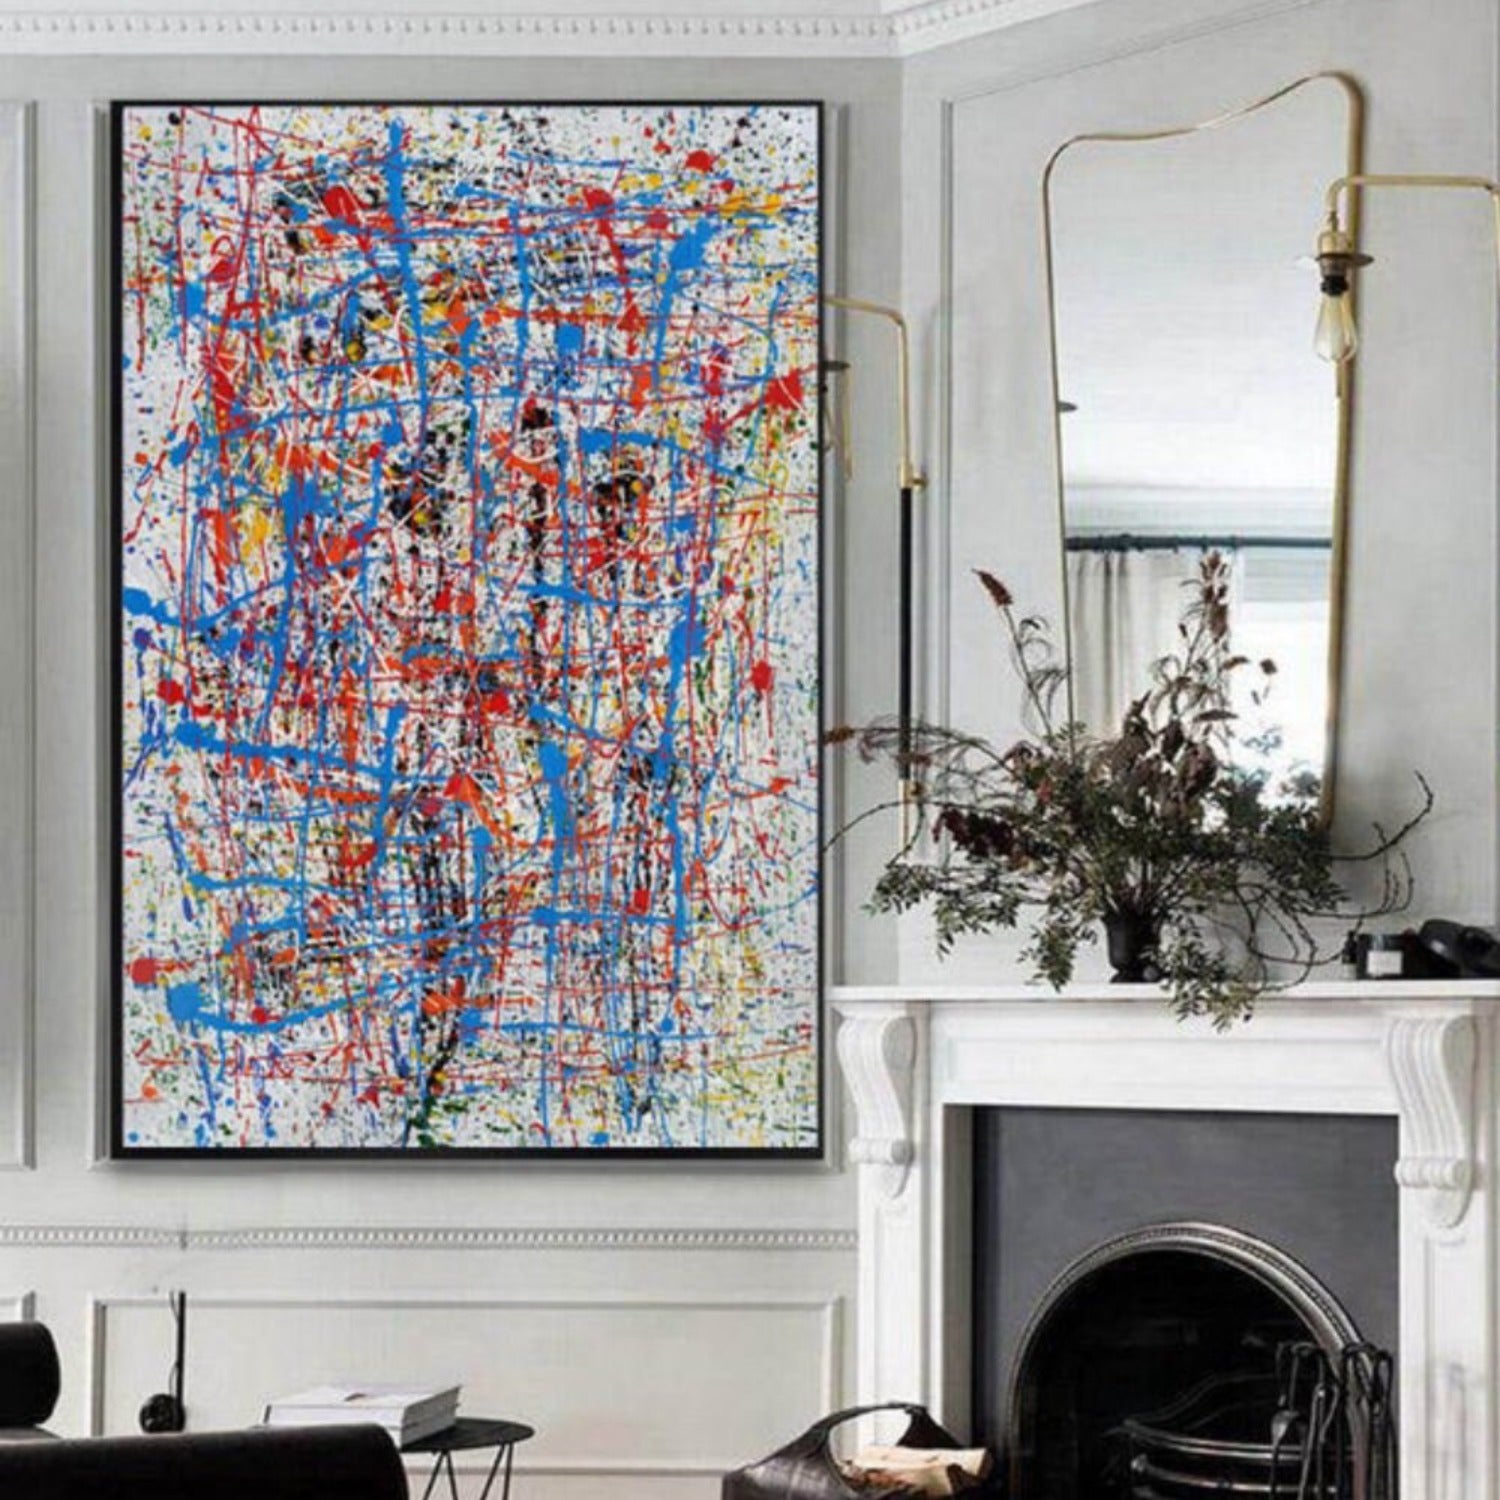 Acrylic Pollock Hand Painted Abstract Oil Painting